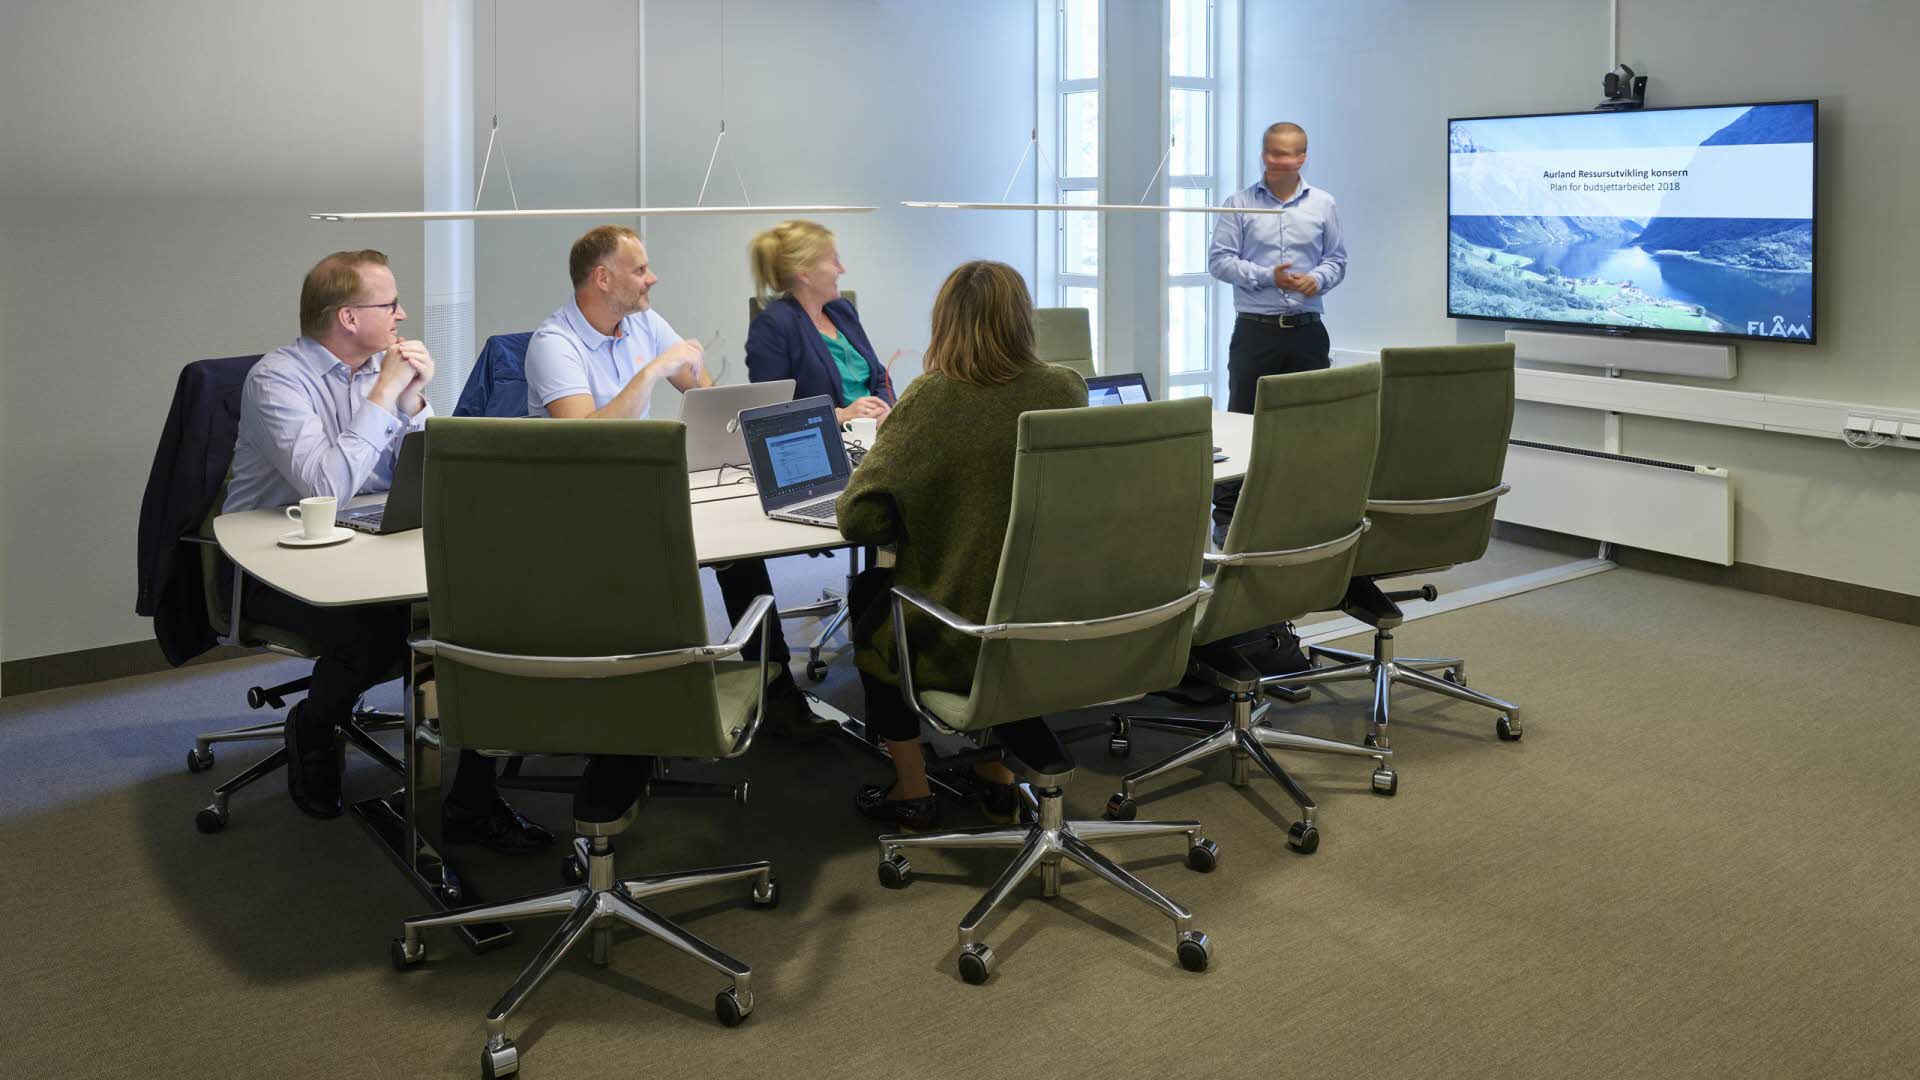 Four people around a conference table watching a man making a presentation on a TV screen.